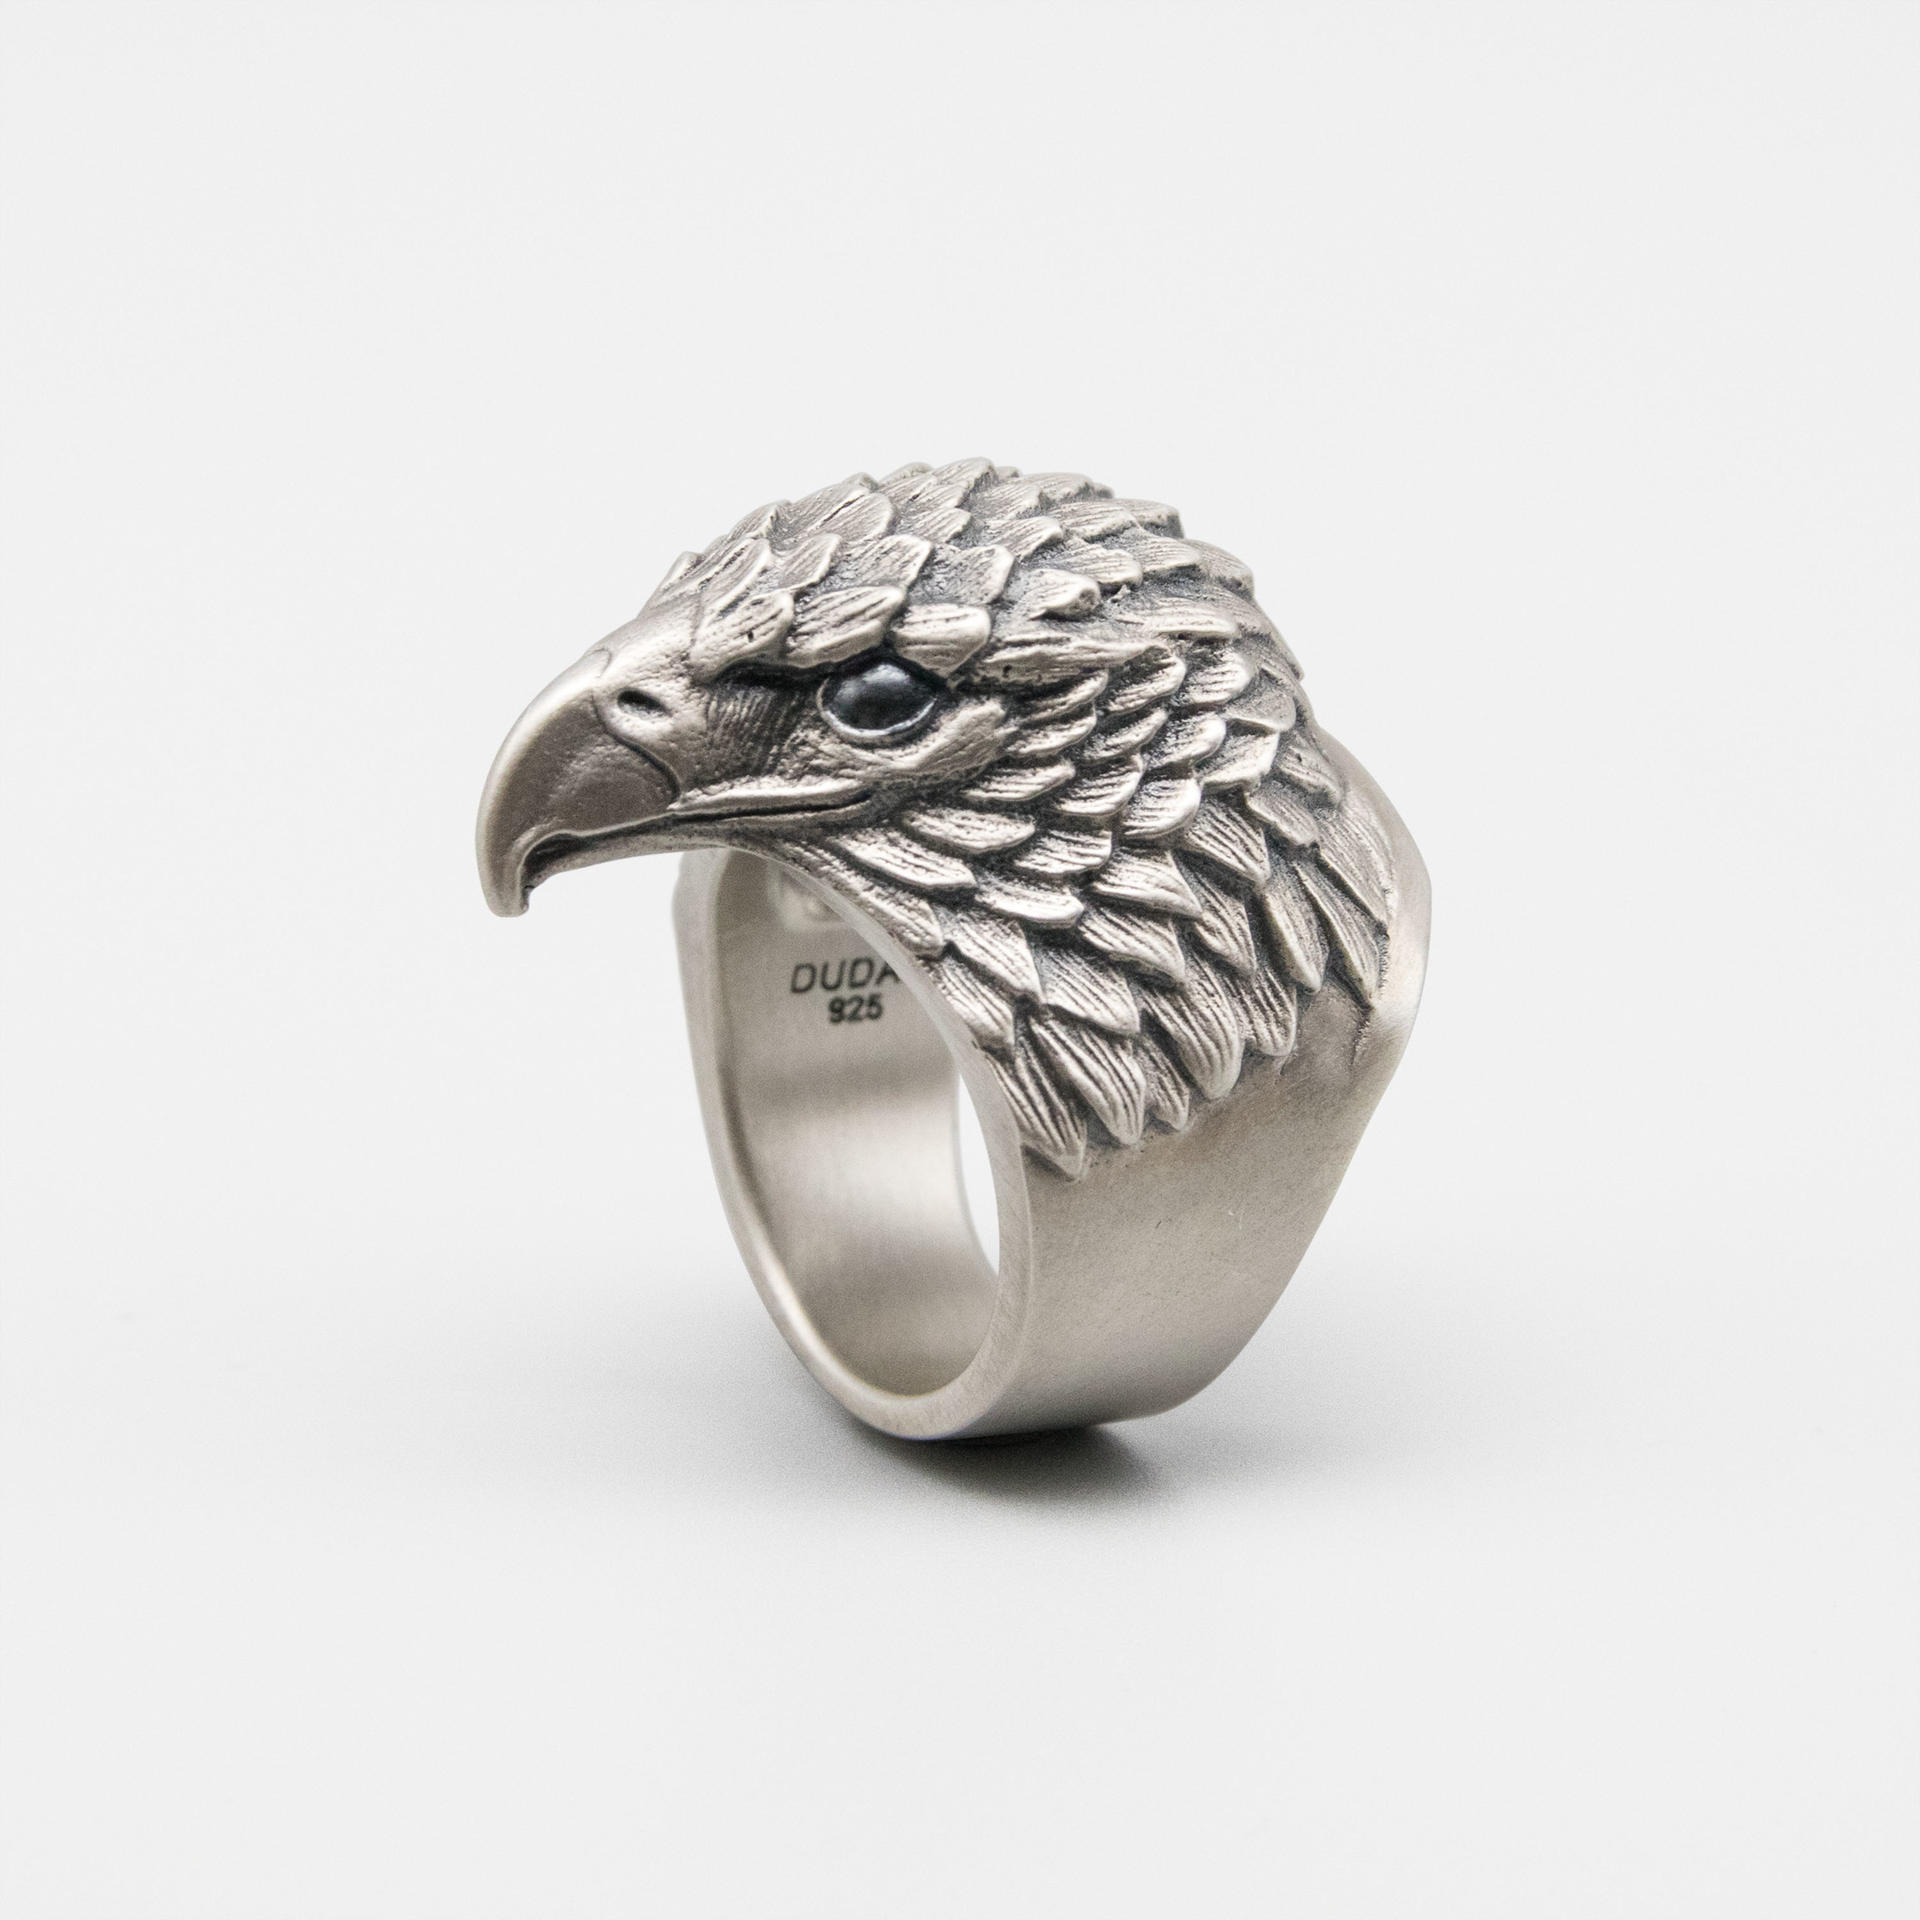 Real 925 Sterling Silver Mens Plain American Bald Eagle Ring Size 7 8 9 10  11 12